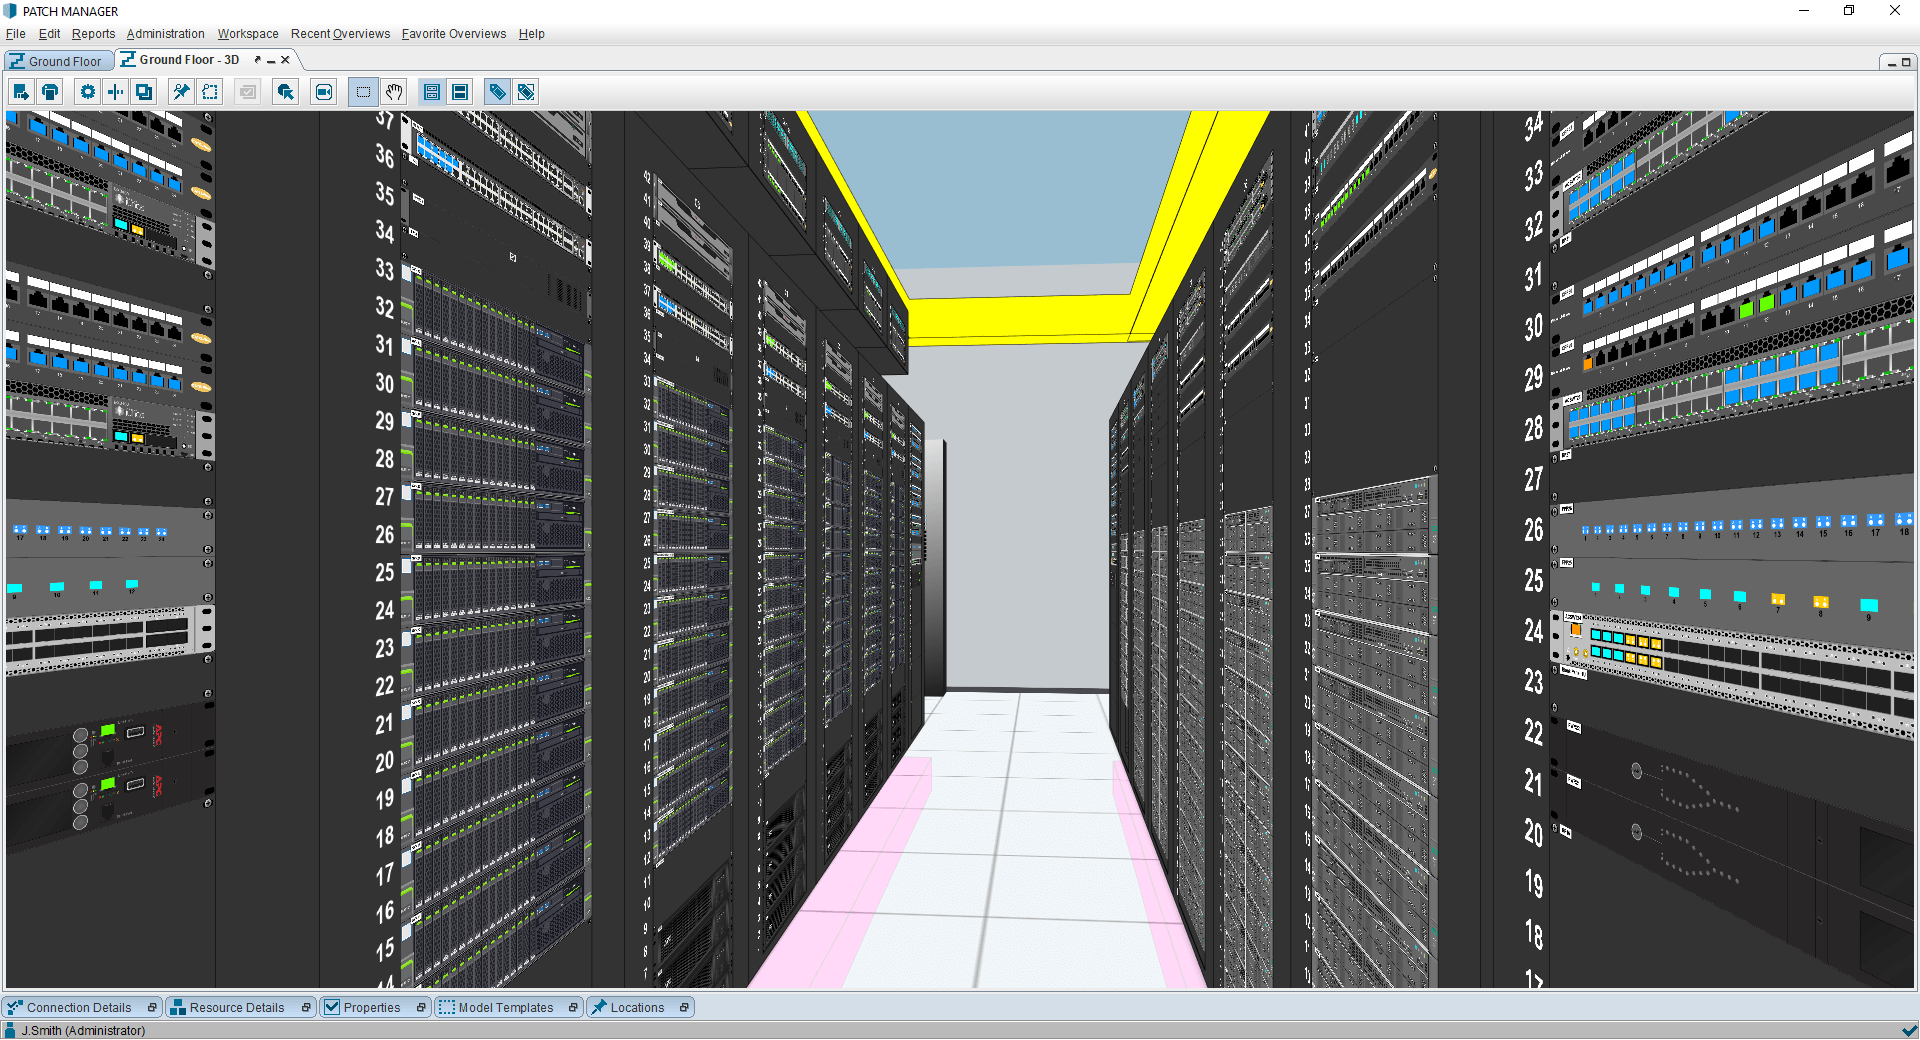 PATCH MANAGER data center 3D overview